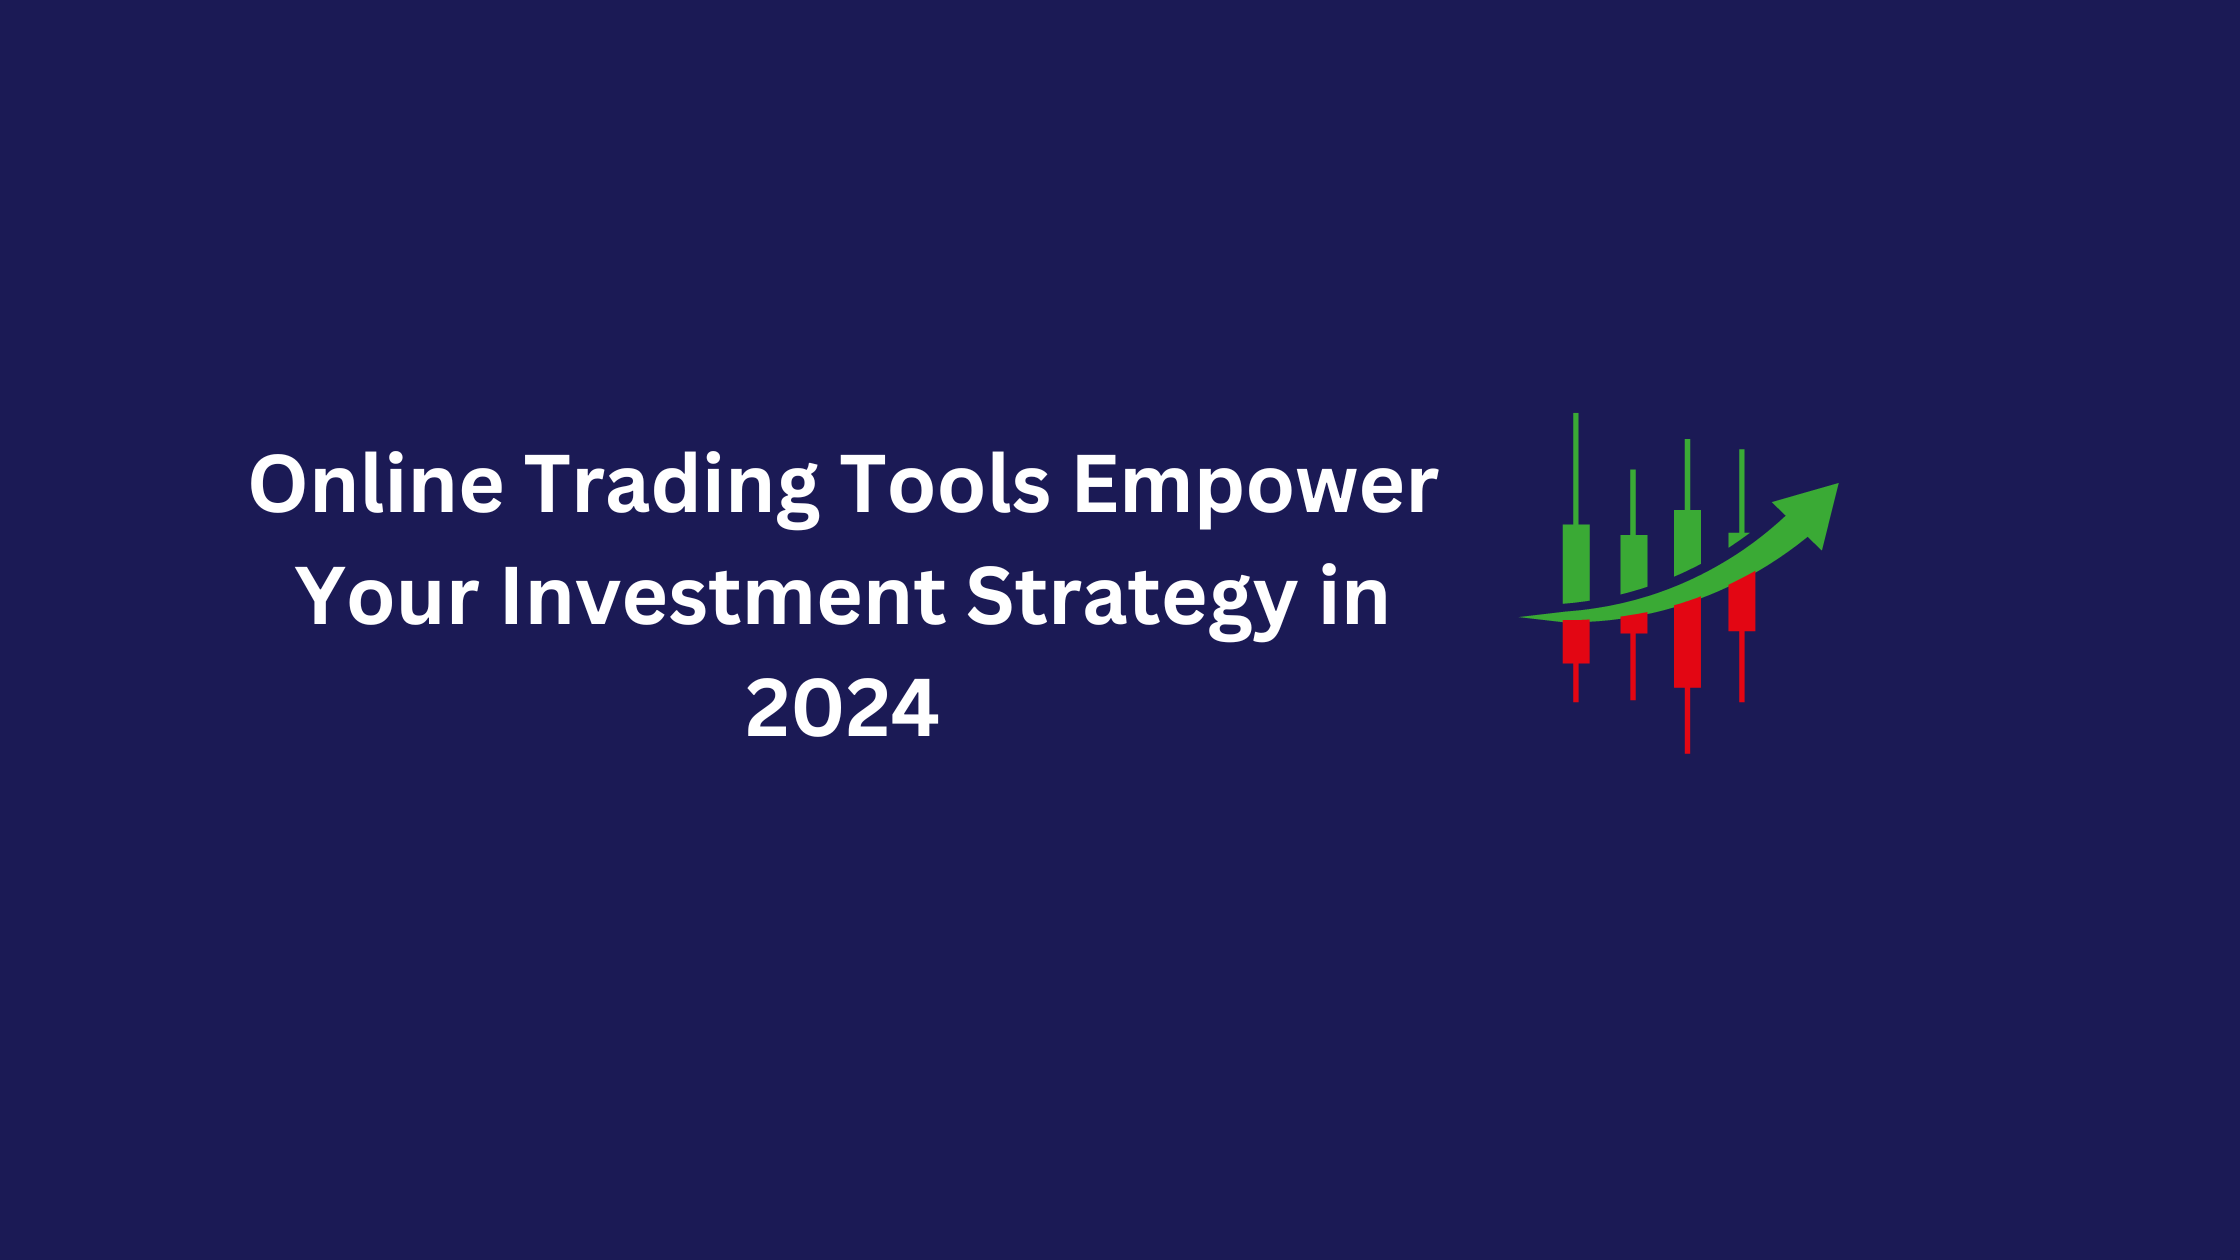 Online Trading Tools: Empower Your Investment Strategy in 2024